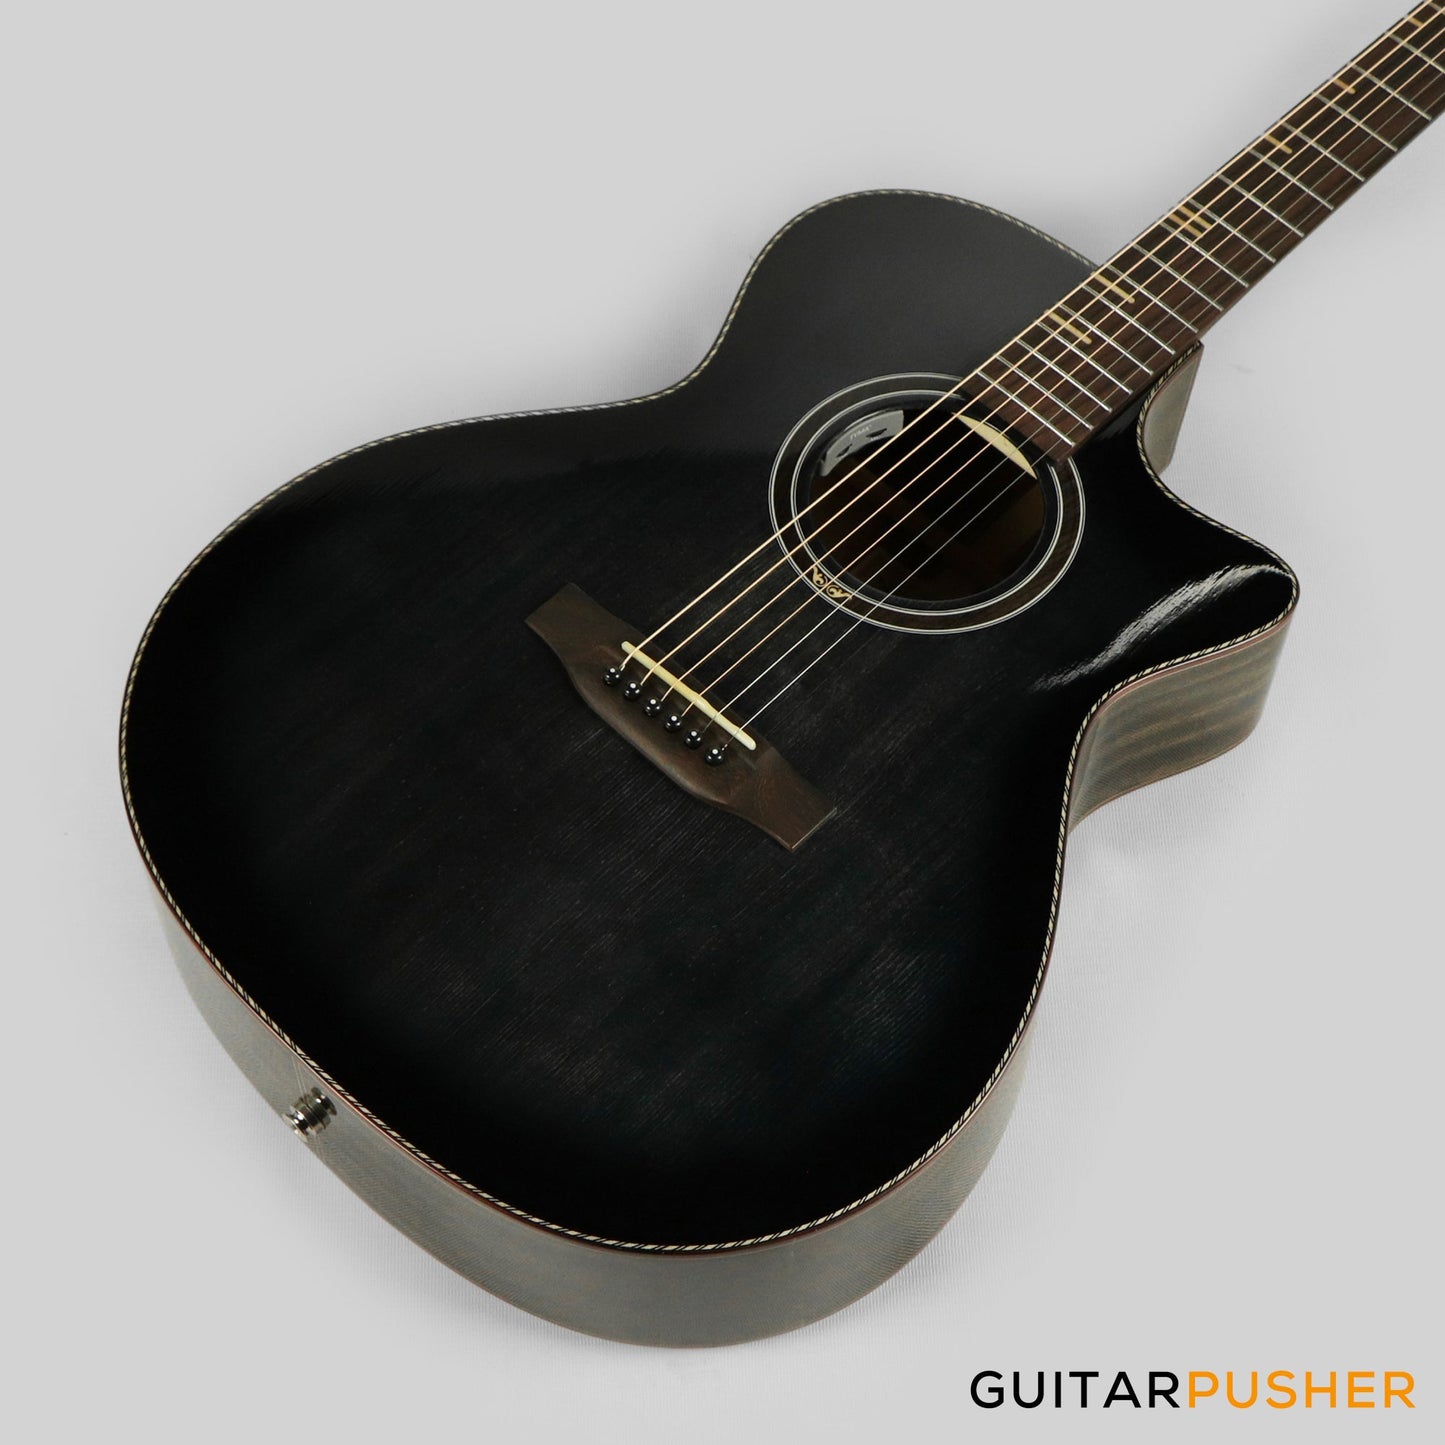 Tyma G-10 BKSE Solid Top Auditorium Acoustic-Electric Guitar with T-200 preamp